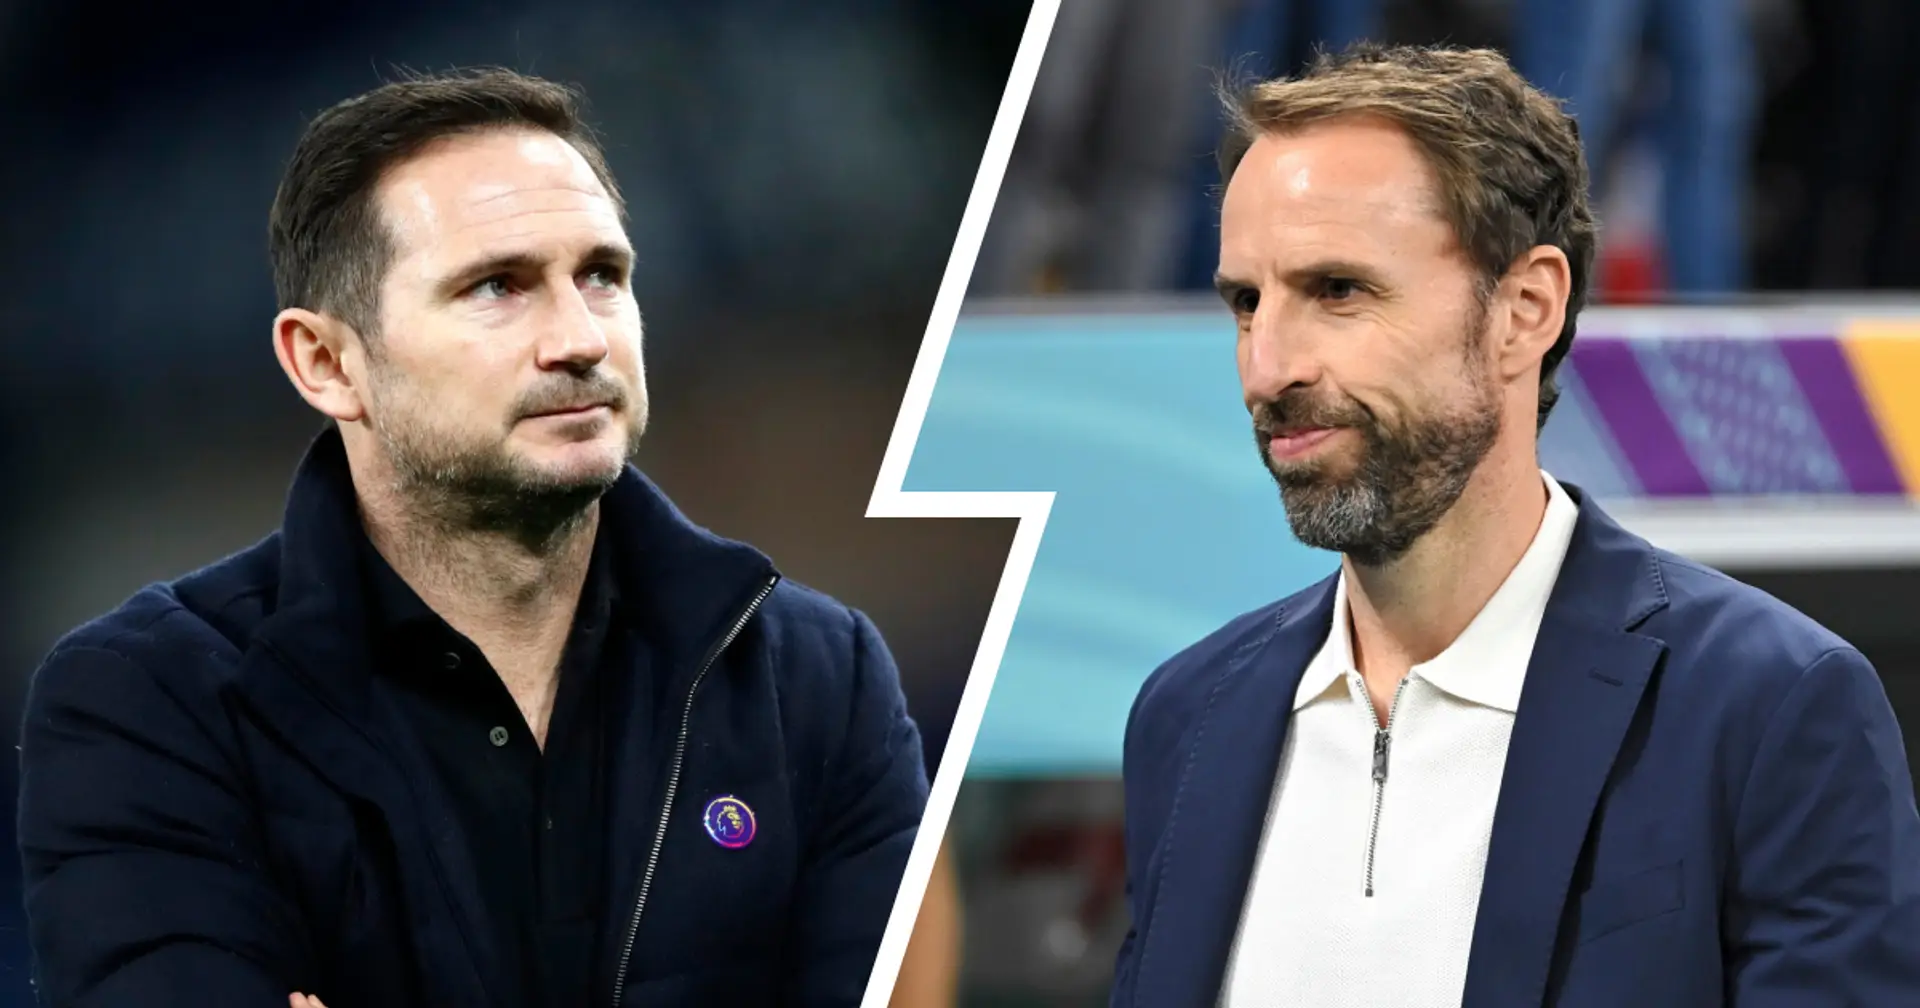 Frank Lampard could be considered for England job if Gareth Southgate resigns - Daily Mail